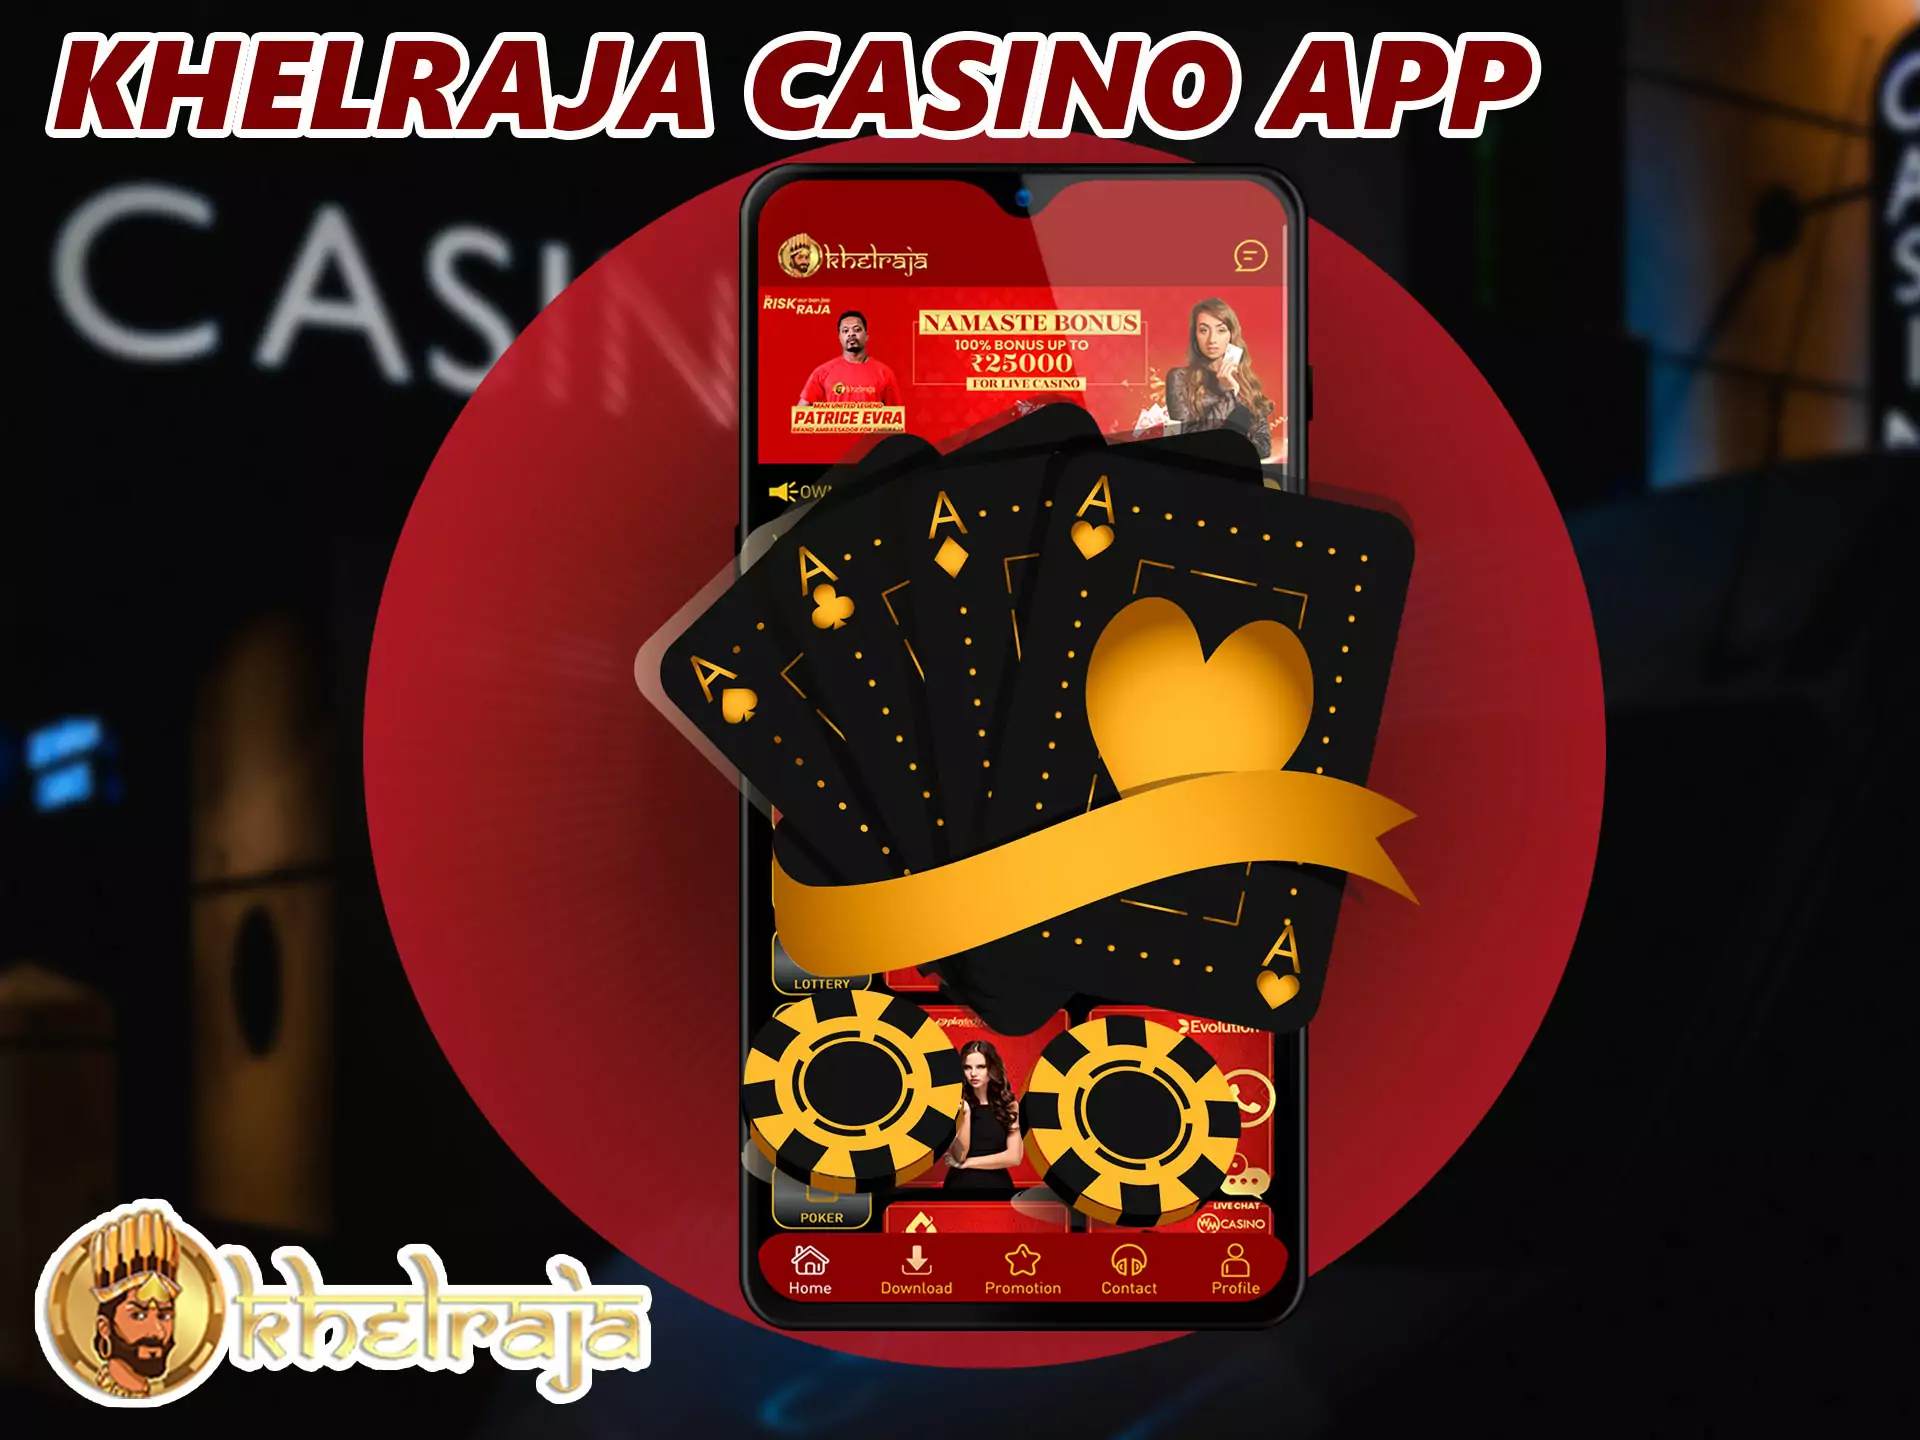 This section is divided into two parts: an online game and with real people, there are slot machines, there is a filter for different games.